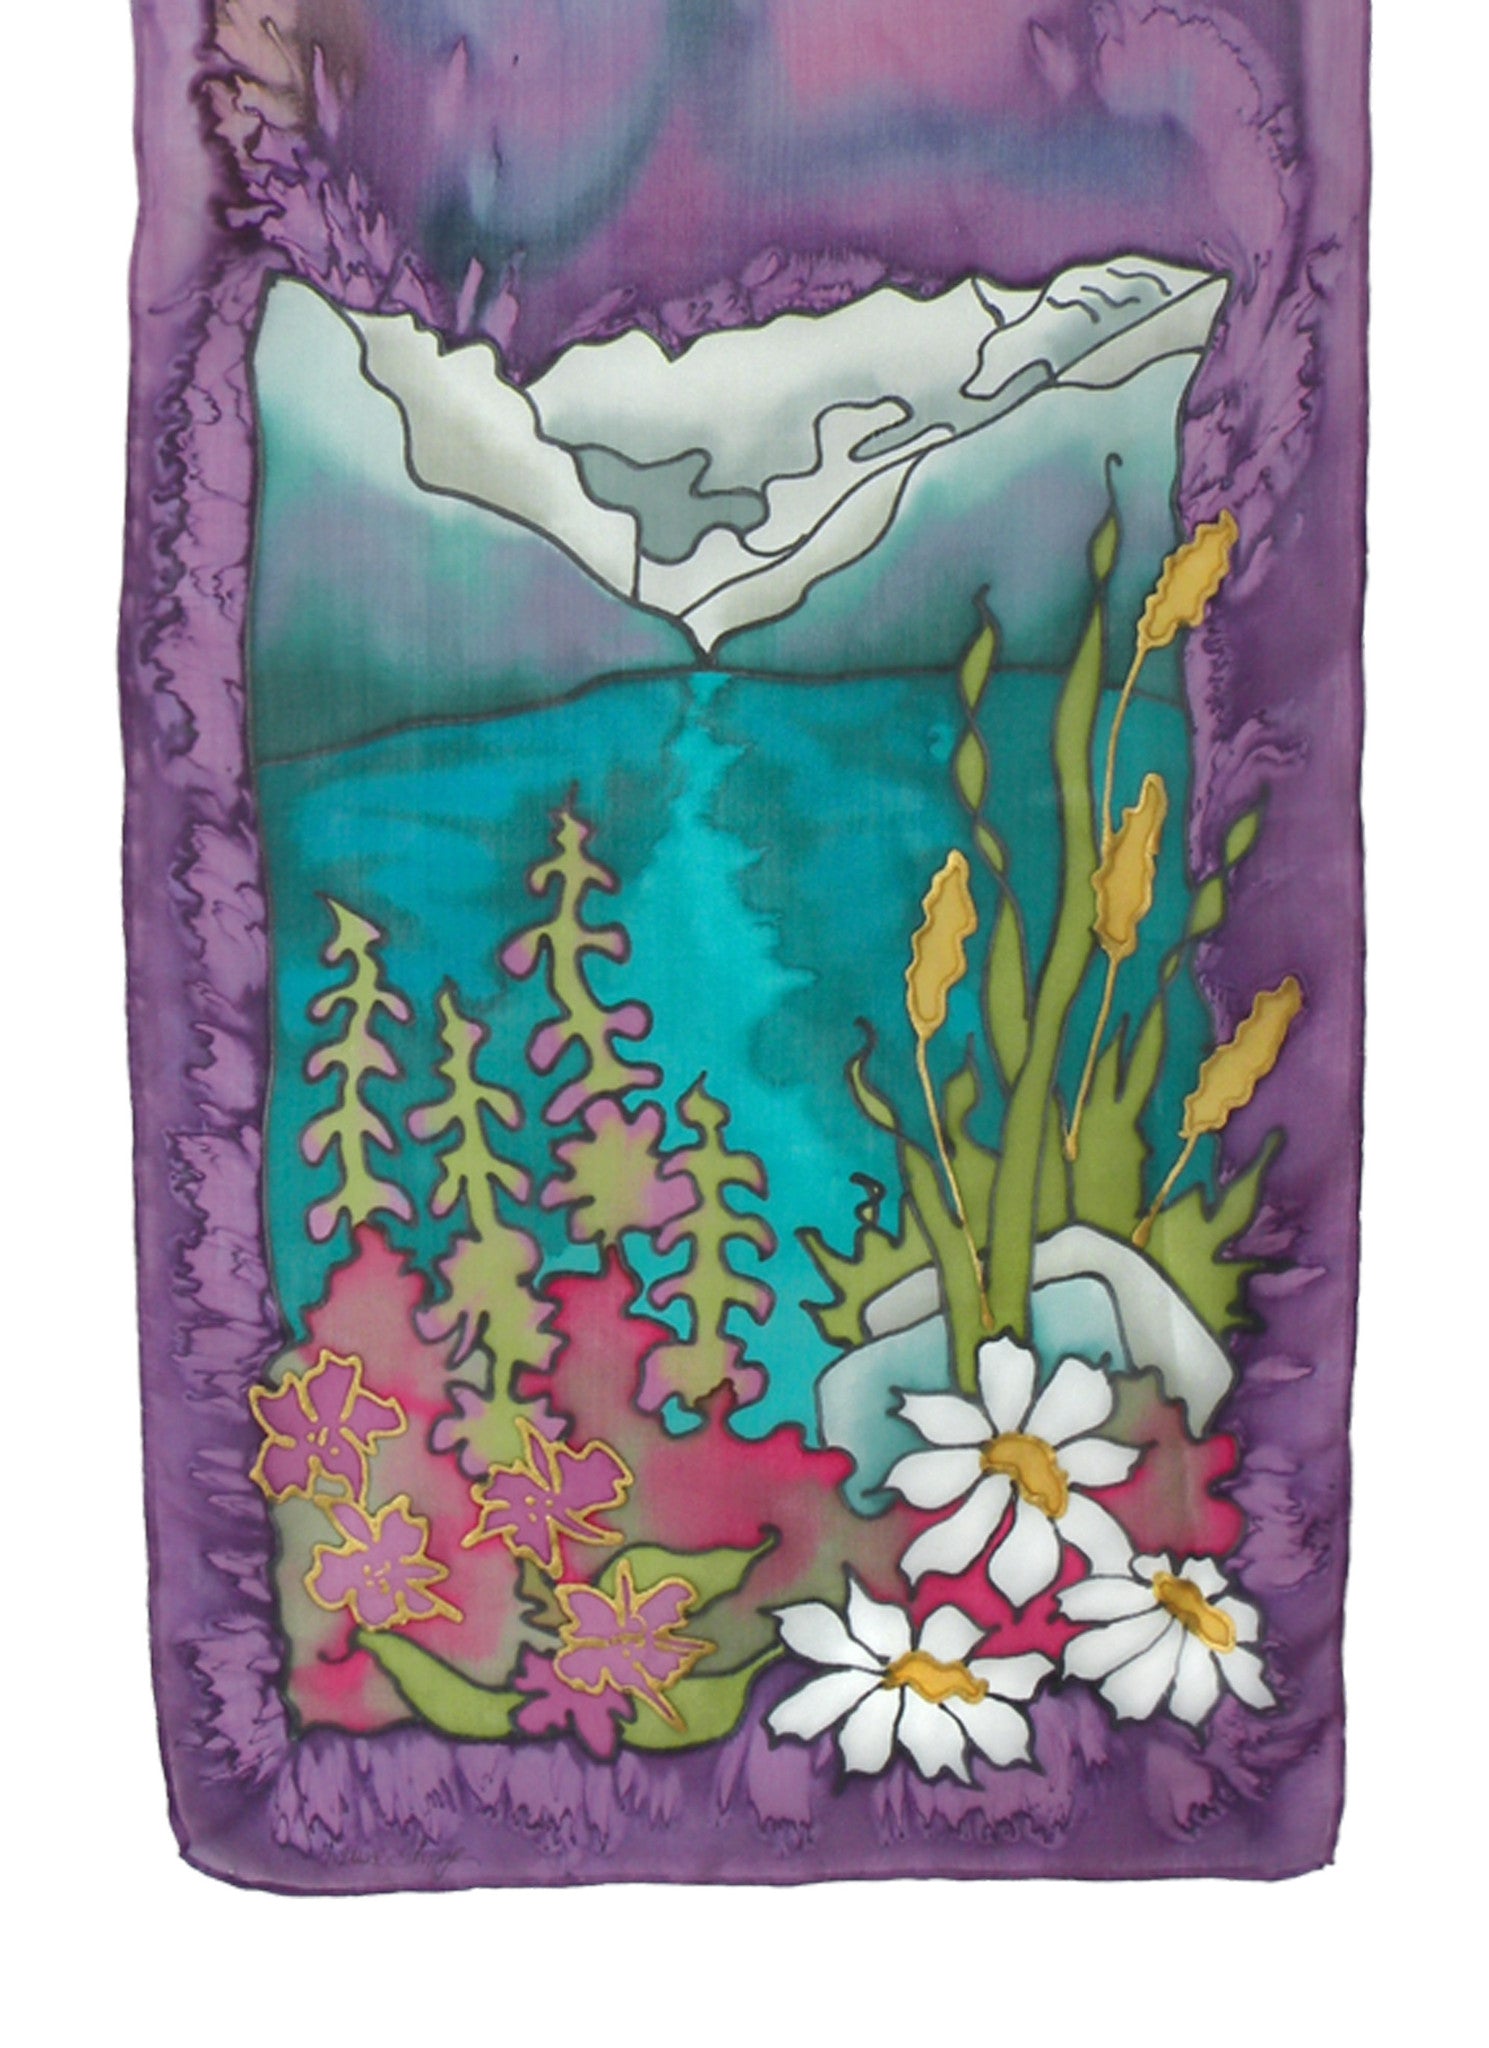 Hand-painted silk rocky mountain flowers design in blue